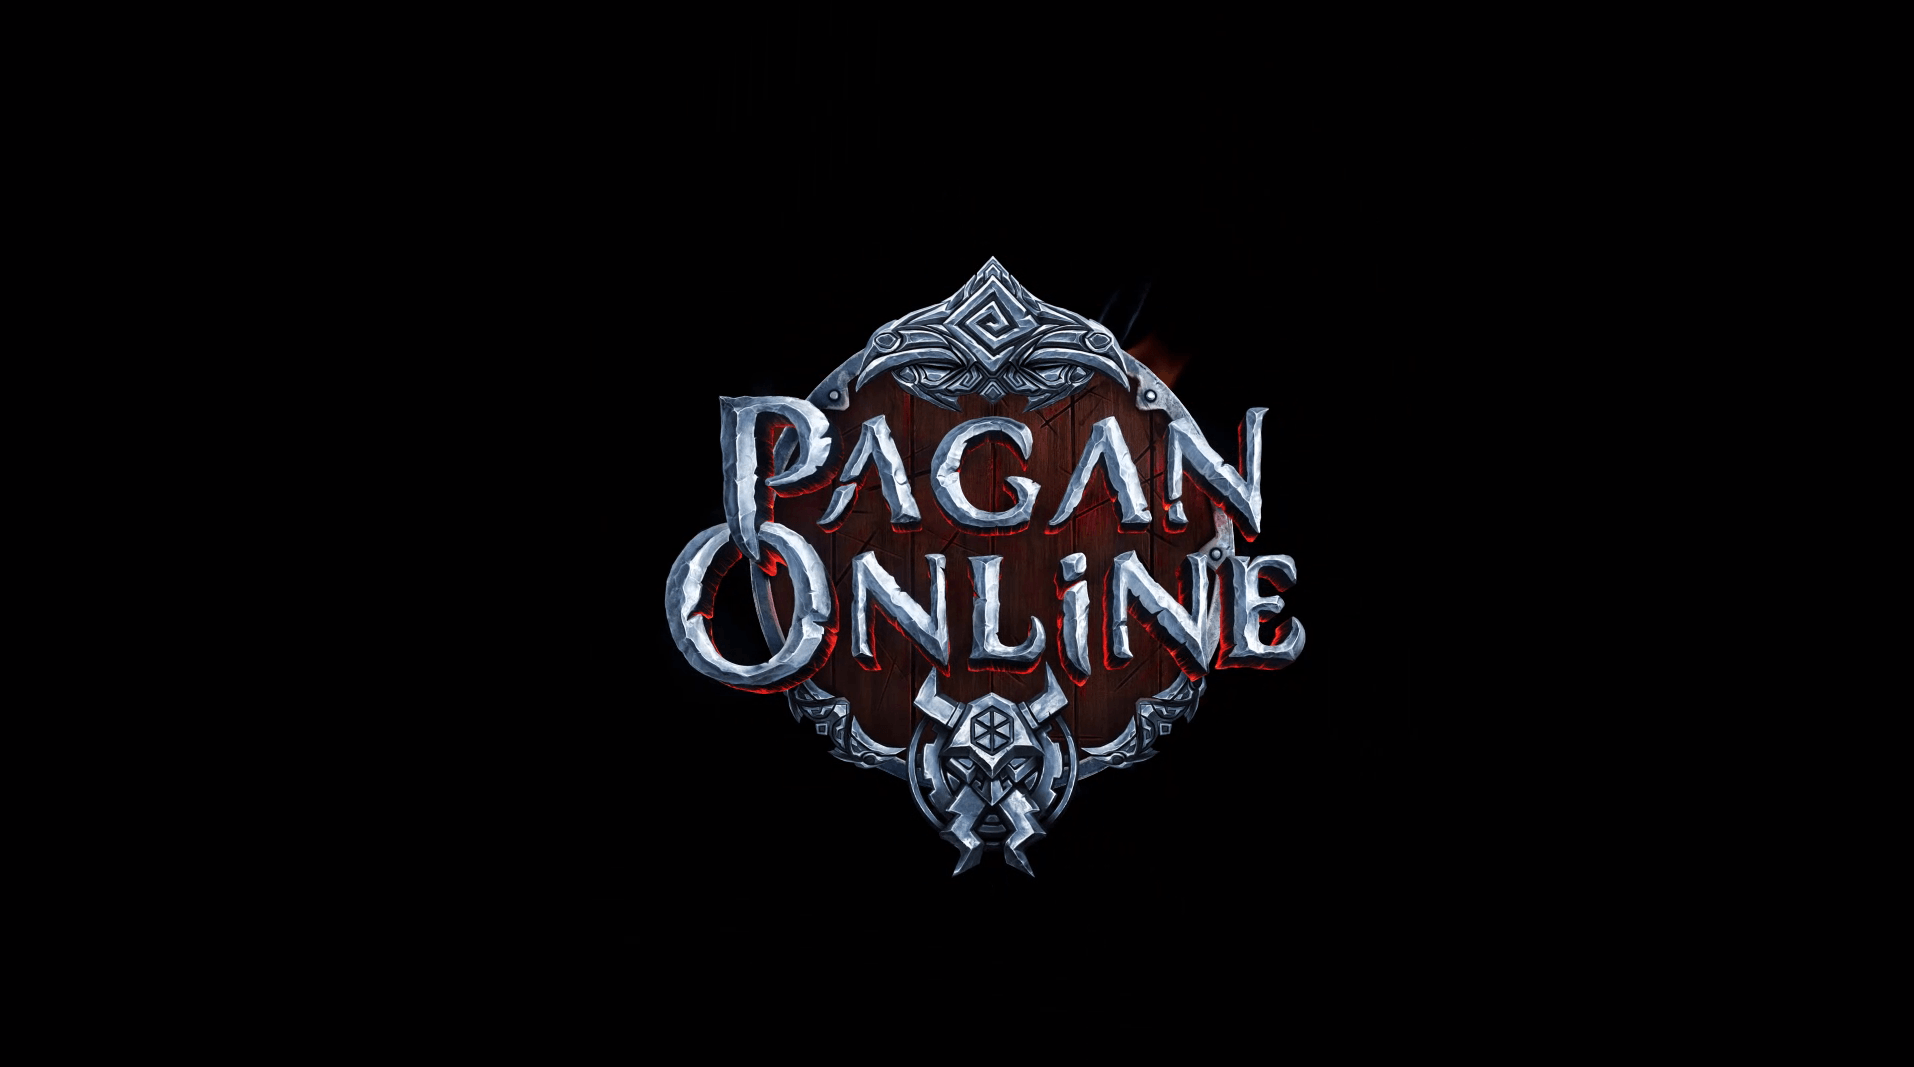 Pagan Online PC Review- Watch out for Perun’s Arrow